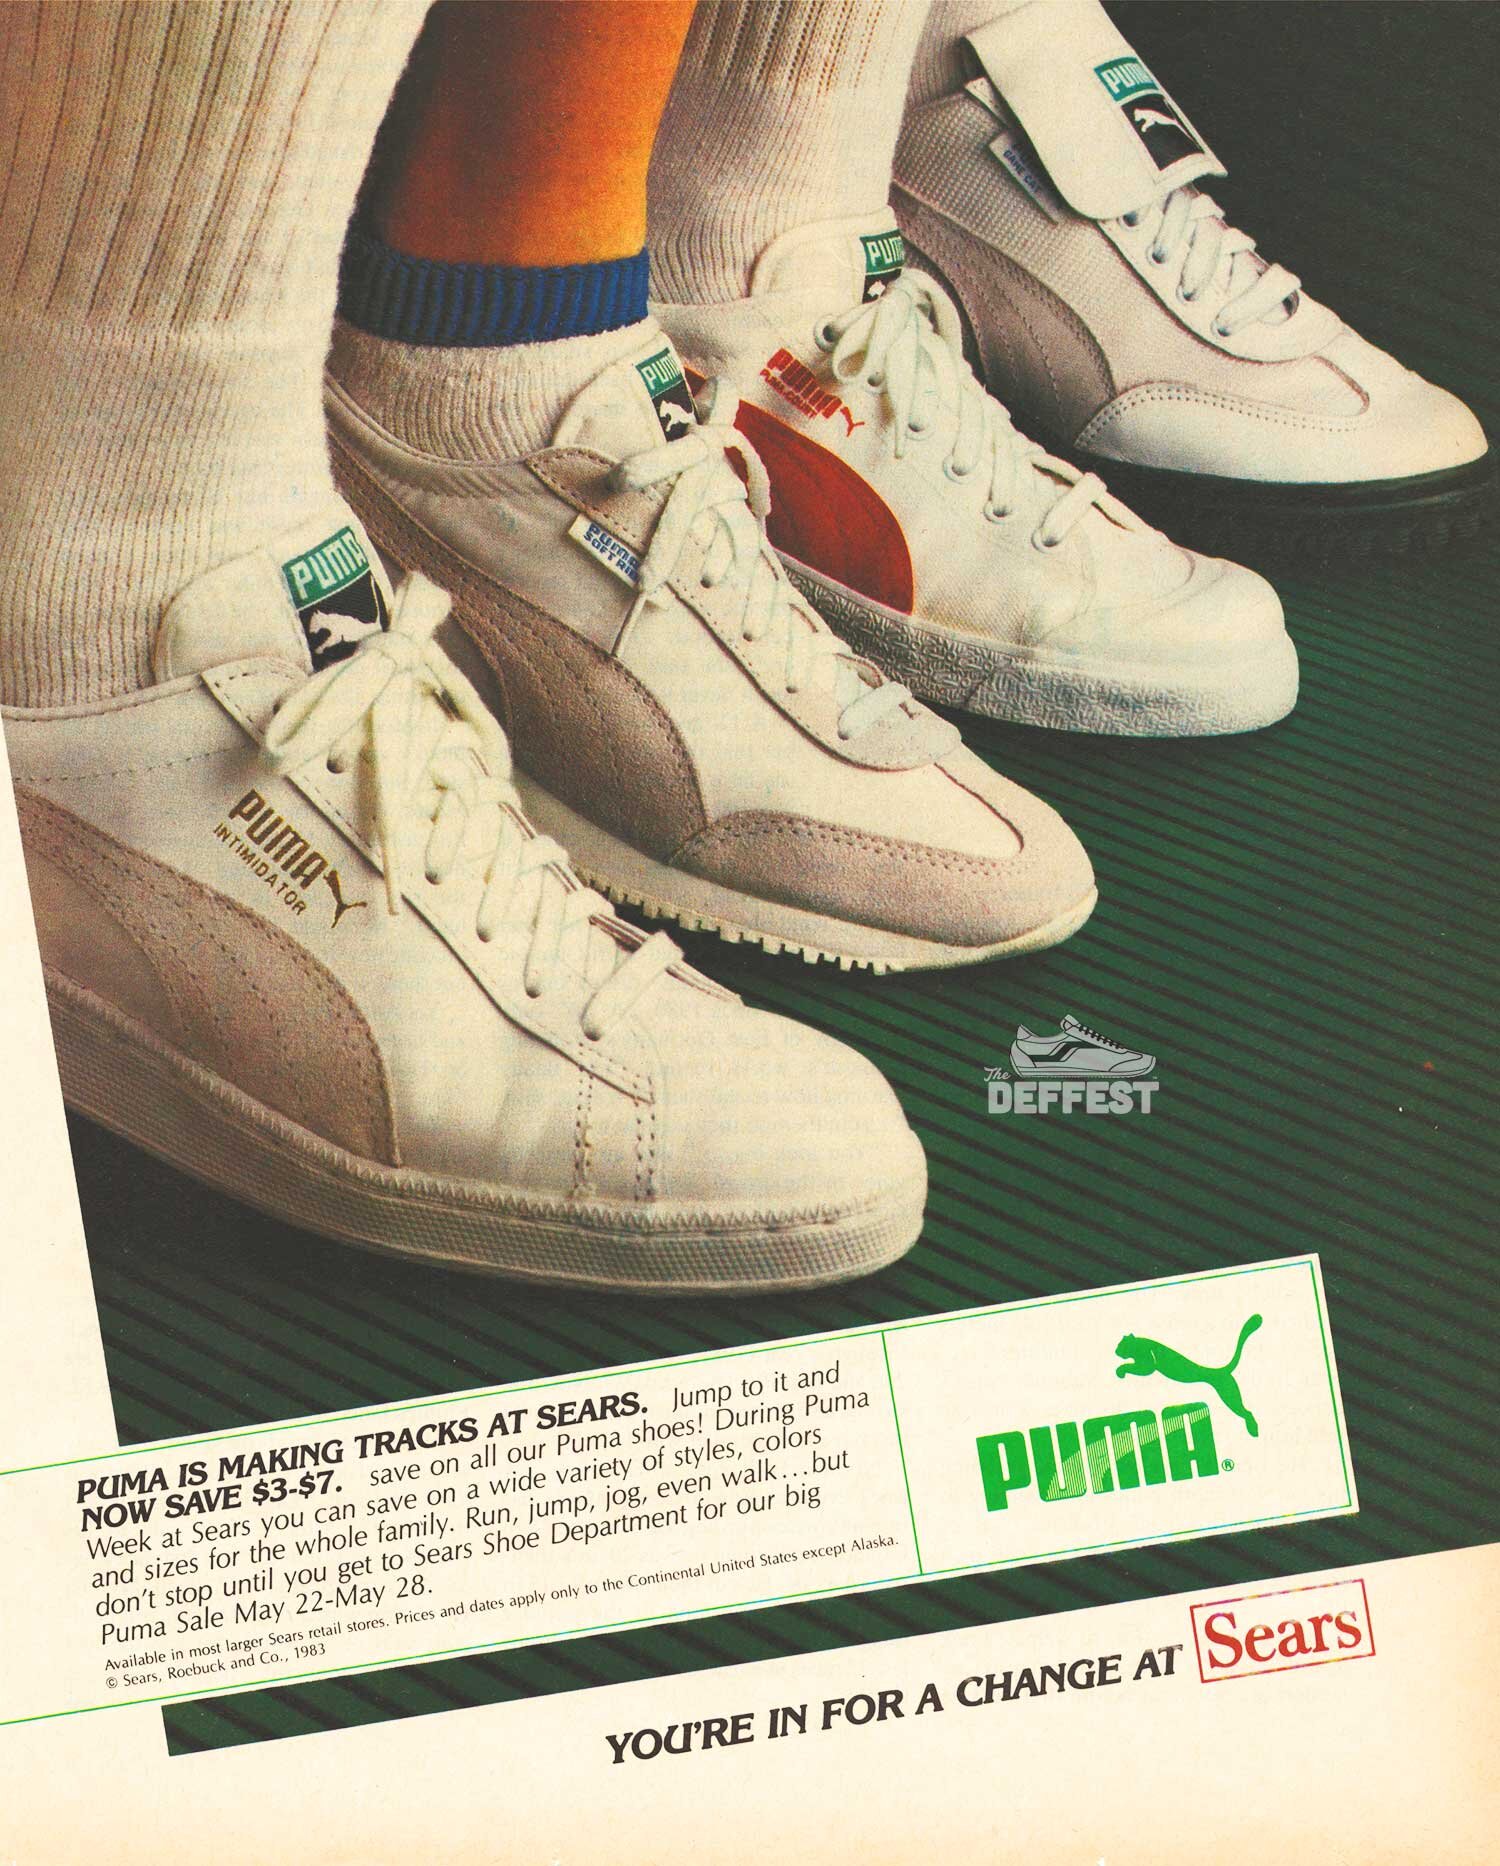 The Deffest®. A and retro sneaker blog. — Puma Week 1983 vintage sneaker ad featuring the Intimidator, Soft Rider, Puma Court, and Game Cat